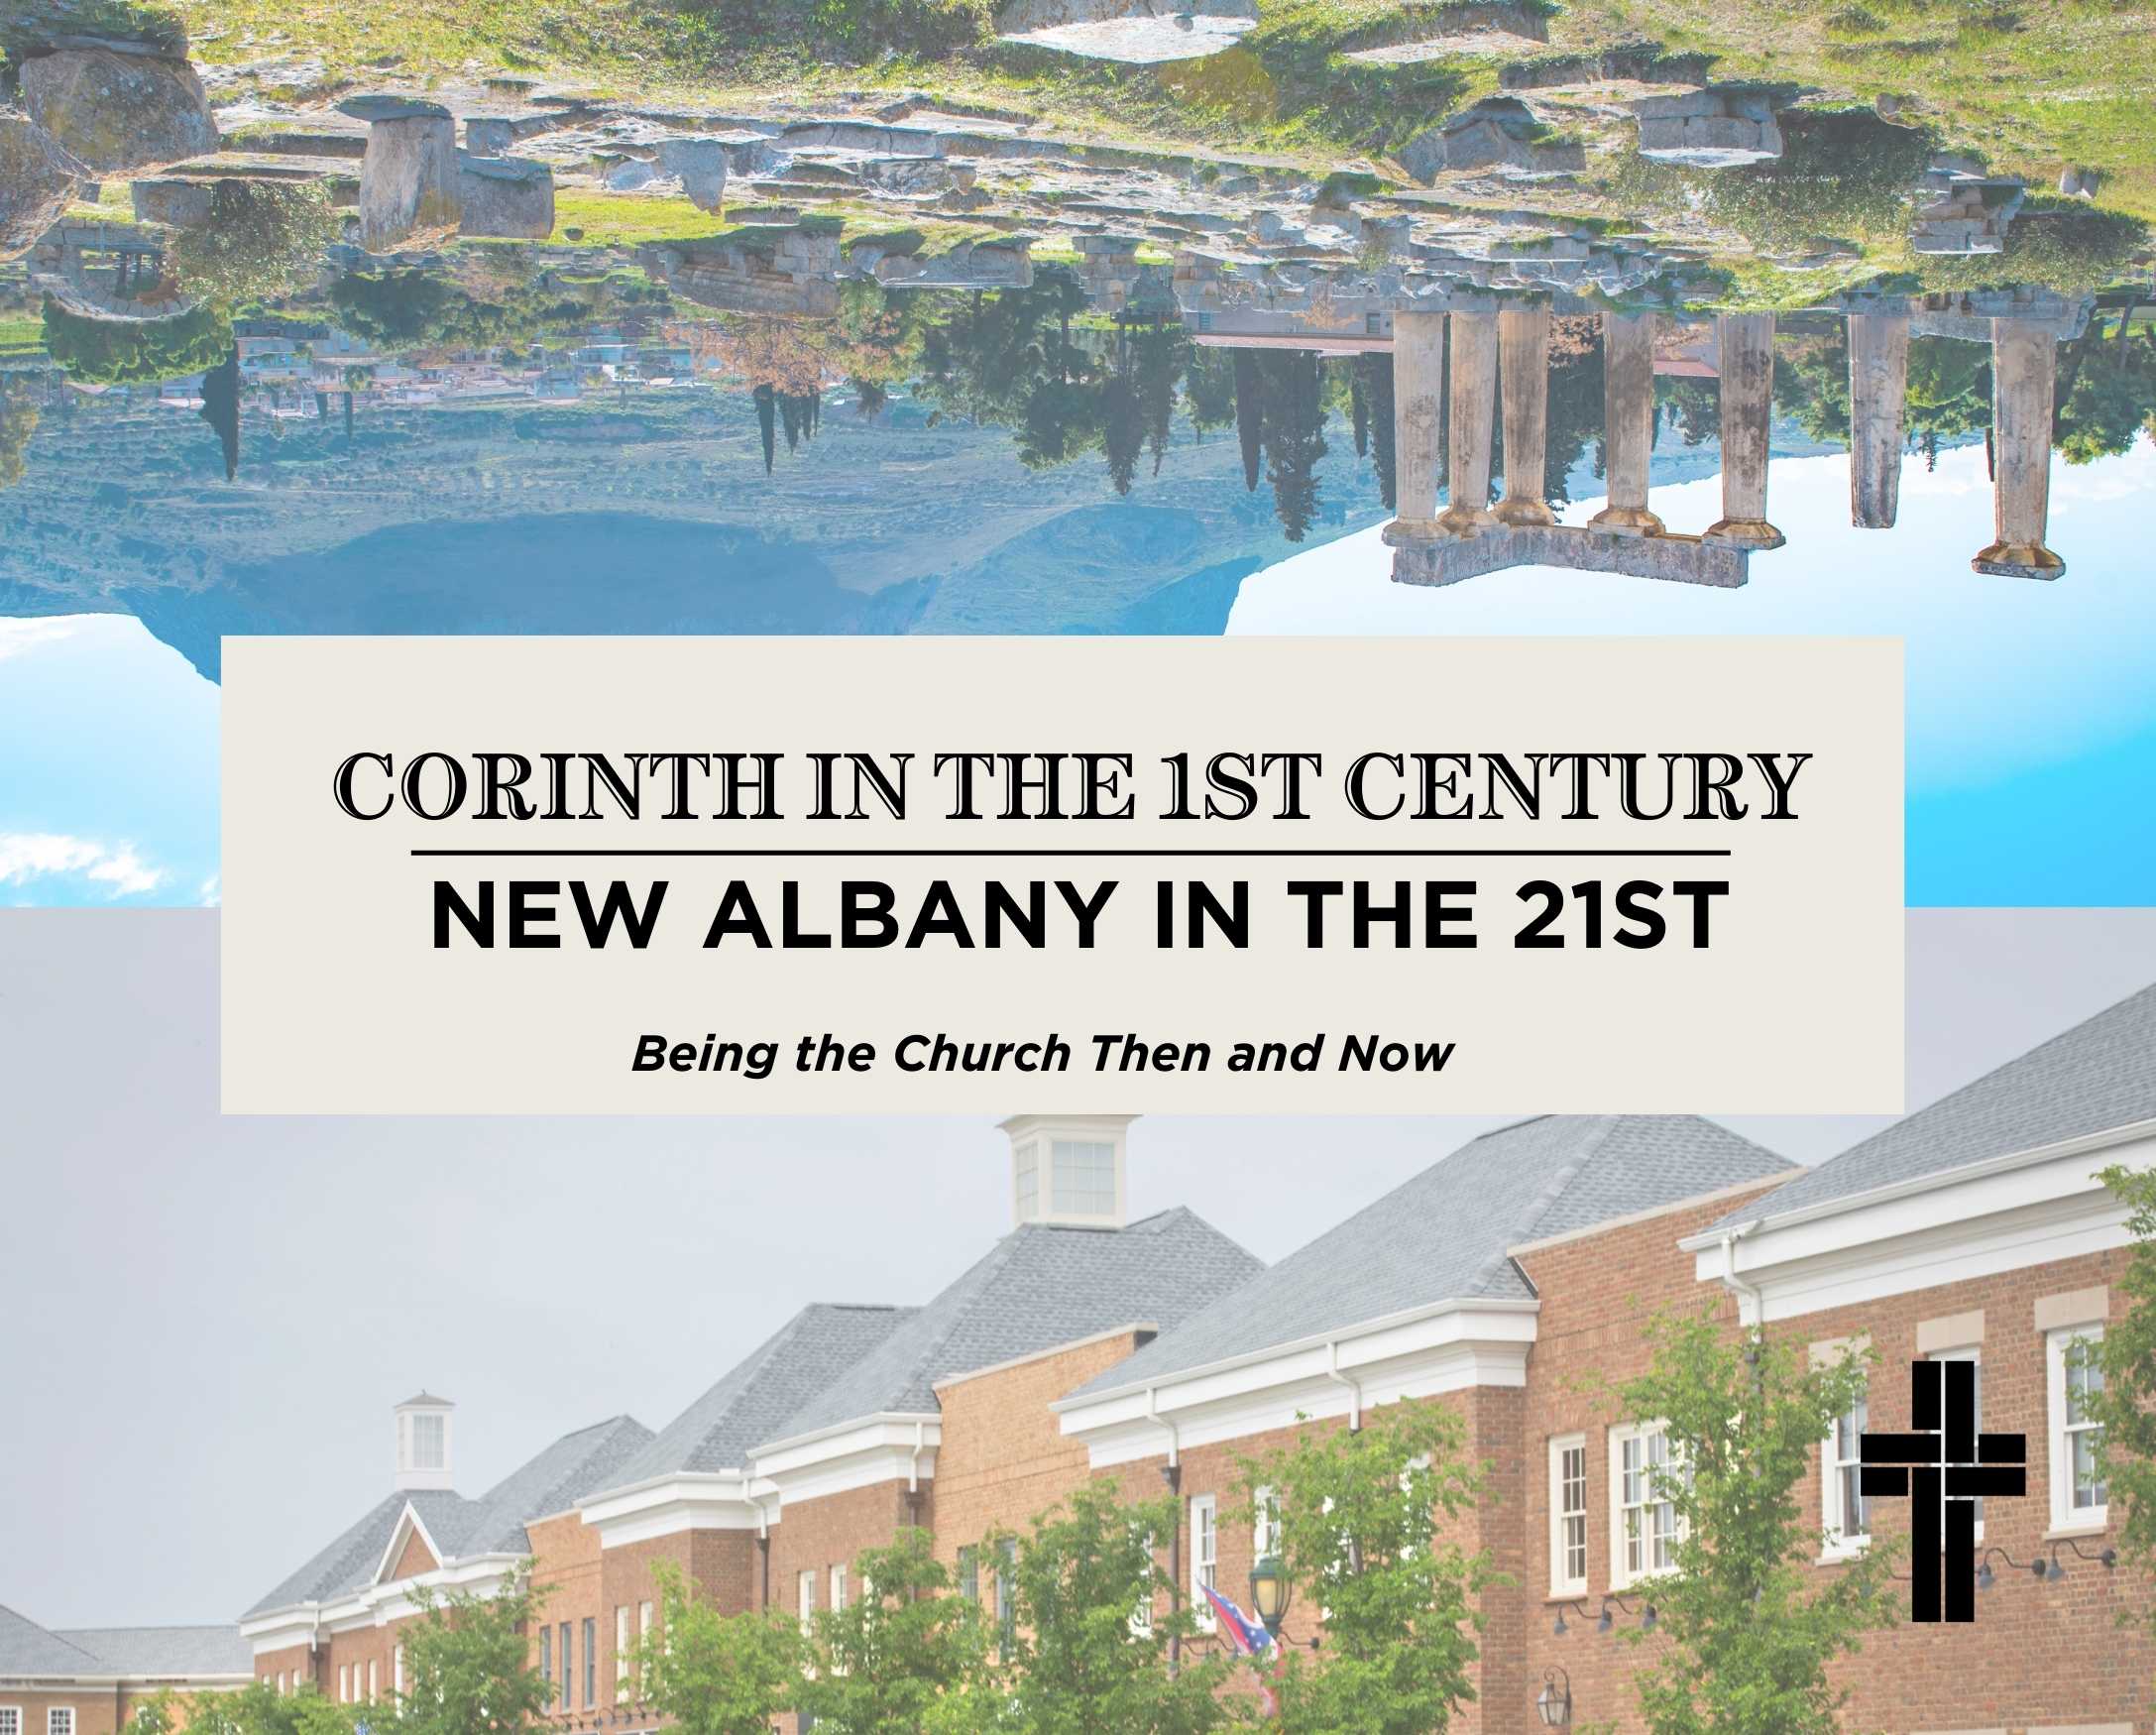 Corinth in the 1st Century, New Albany in the 21st: Caring for One Another